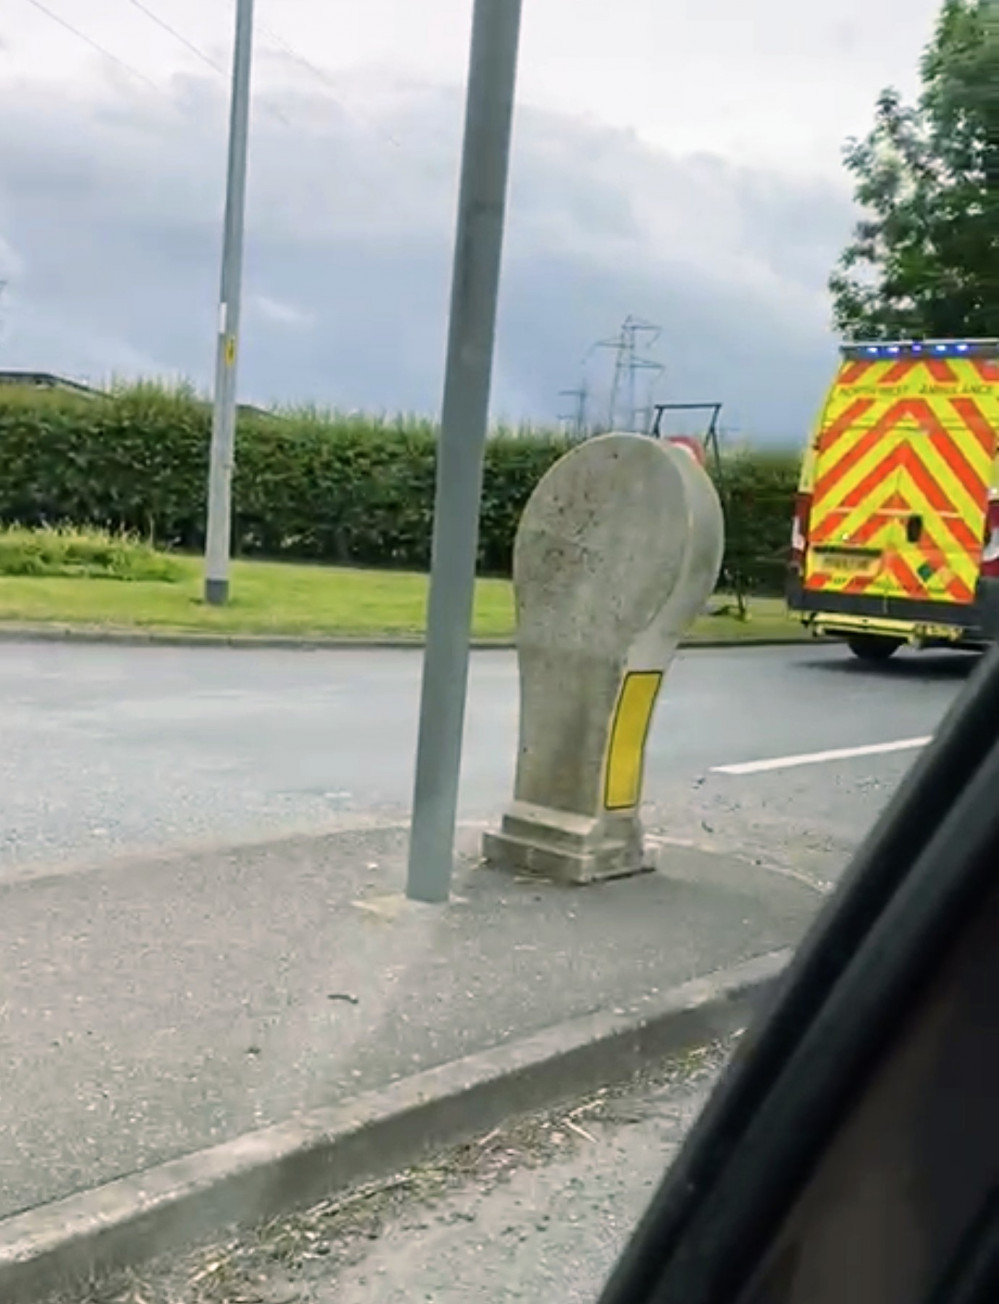 An ambulance turning around at the A530 Middlewich Road junction with Pyms Lane today - May 20 (Crewe Nub News reader).